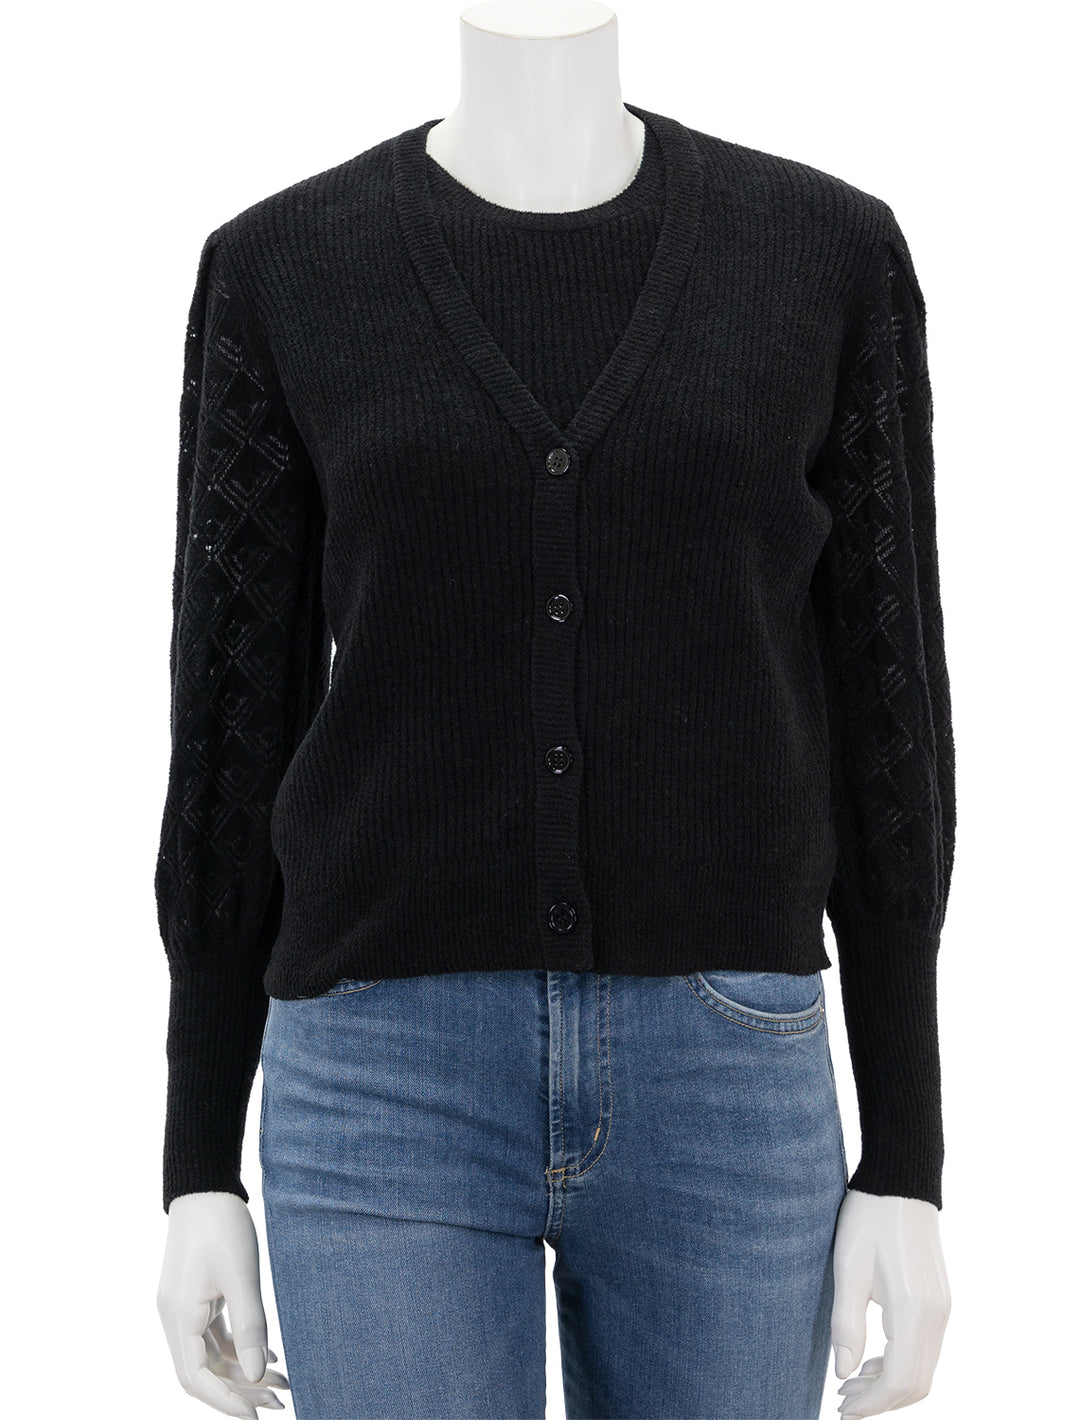 Front view of Sundays NYC's sedona cardigan in black.